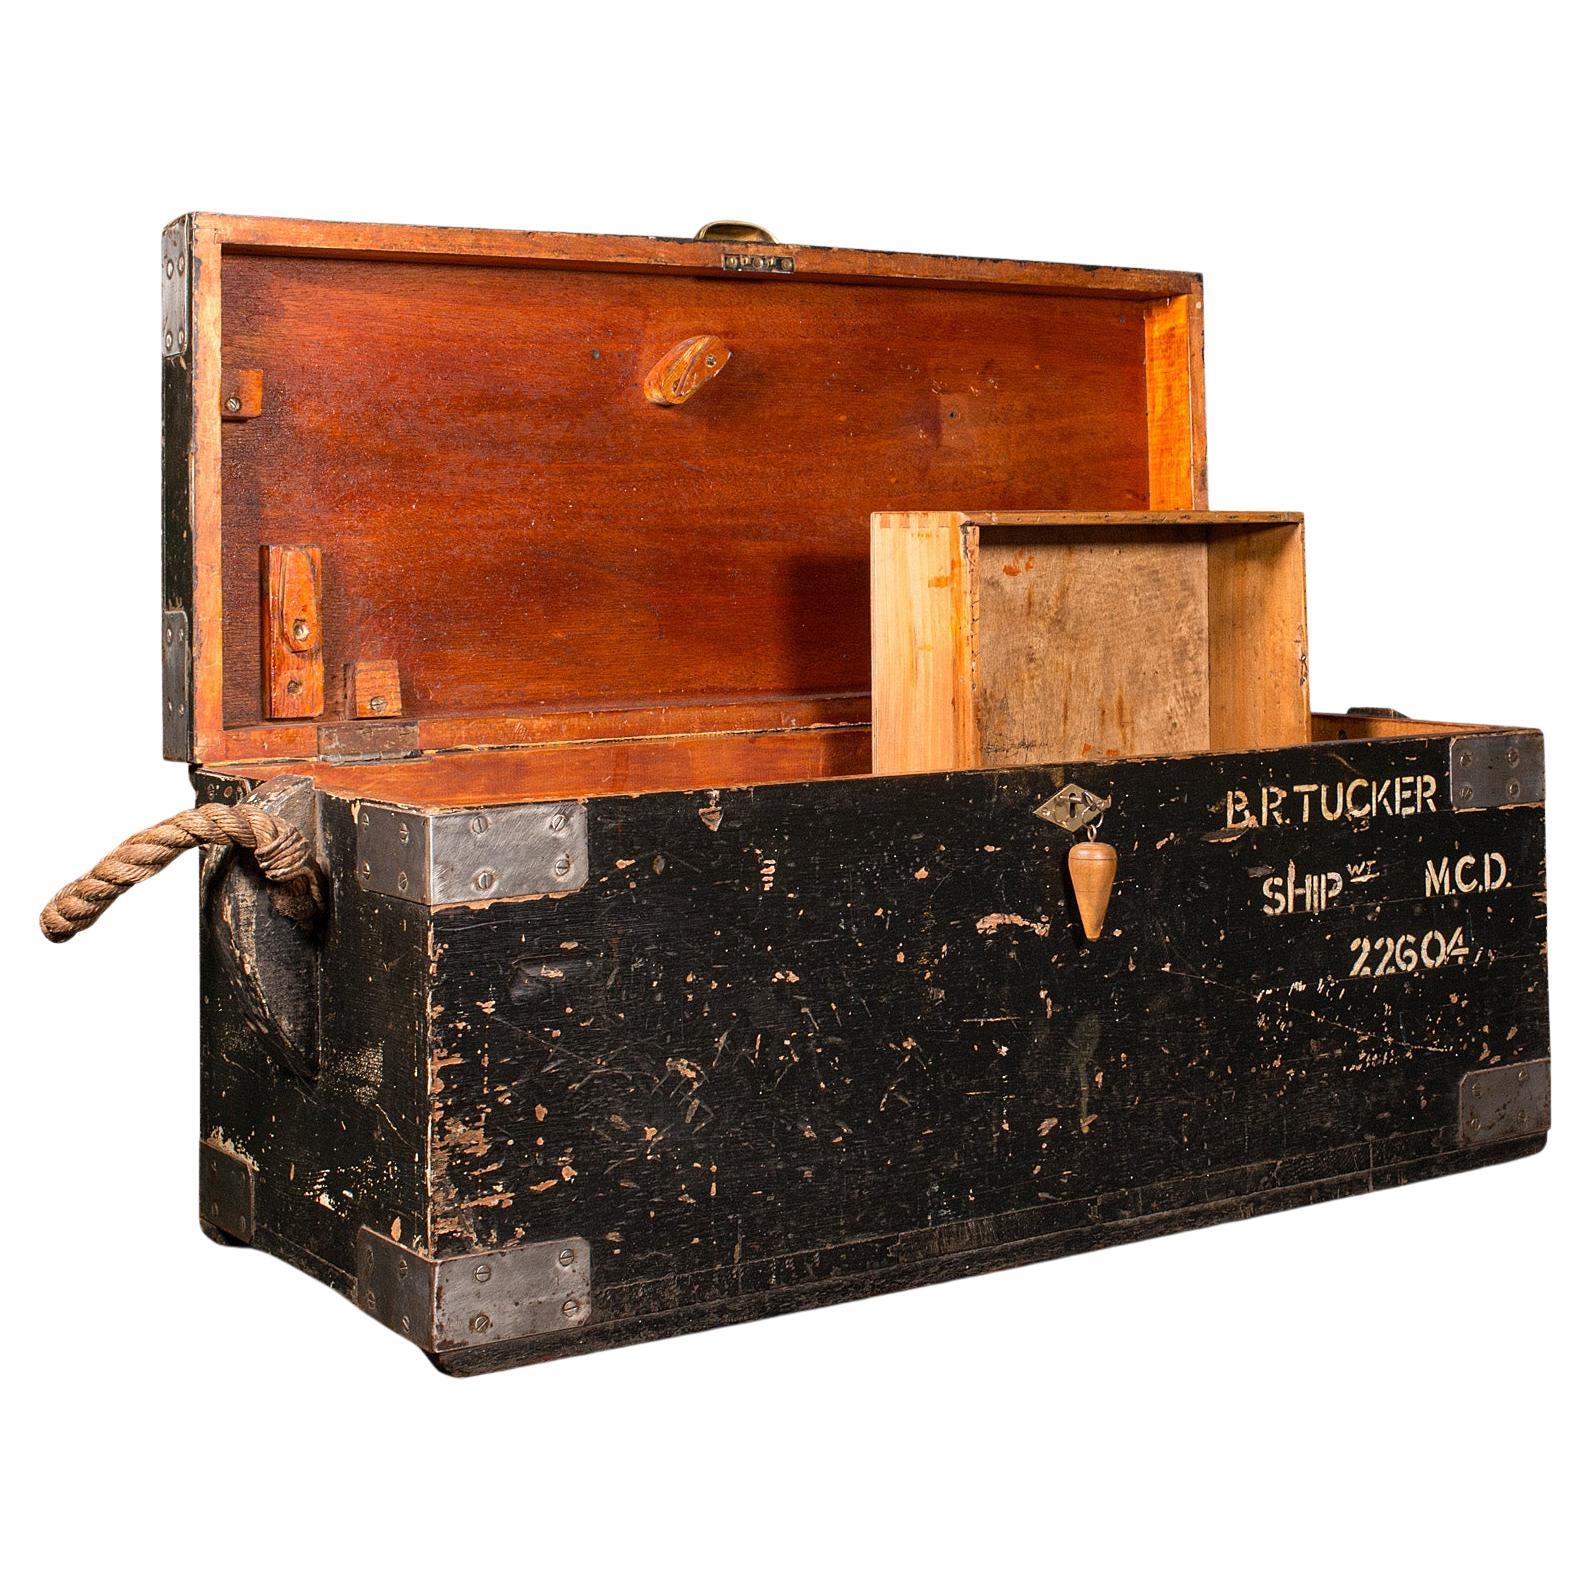 Vintage Shipwright's Tool Chest, English, Cedar, Pine, Craftsman's Trunk, C.1940 For Sale